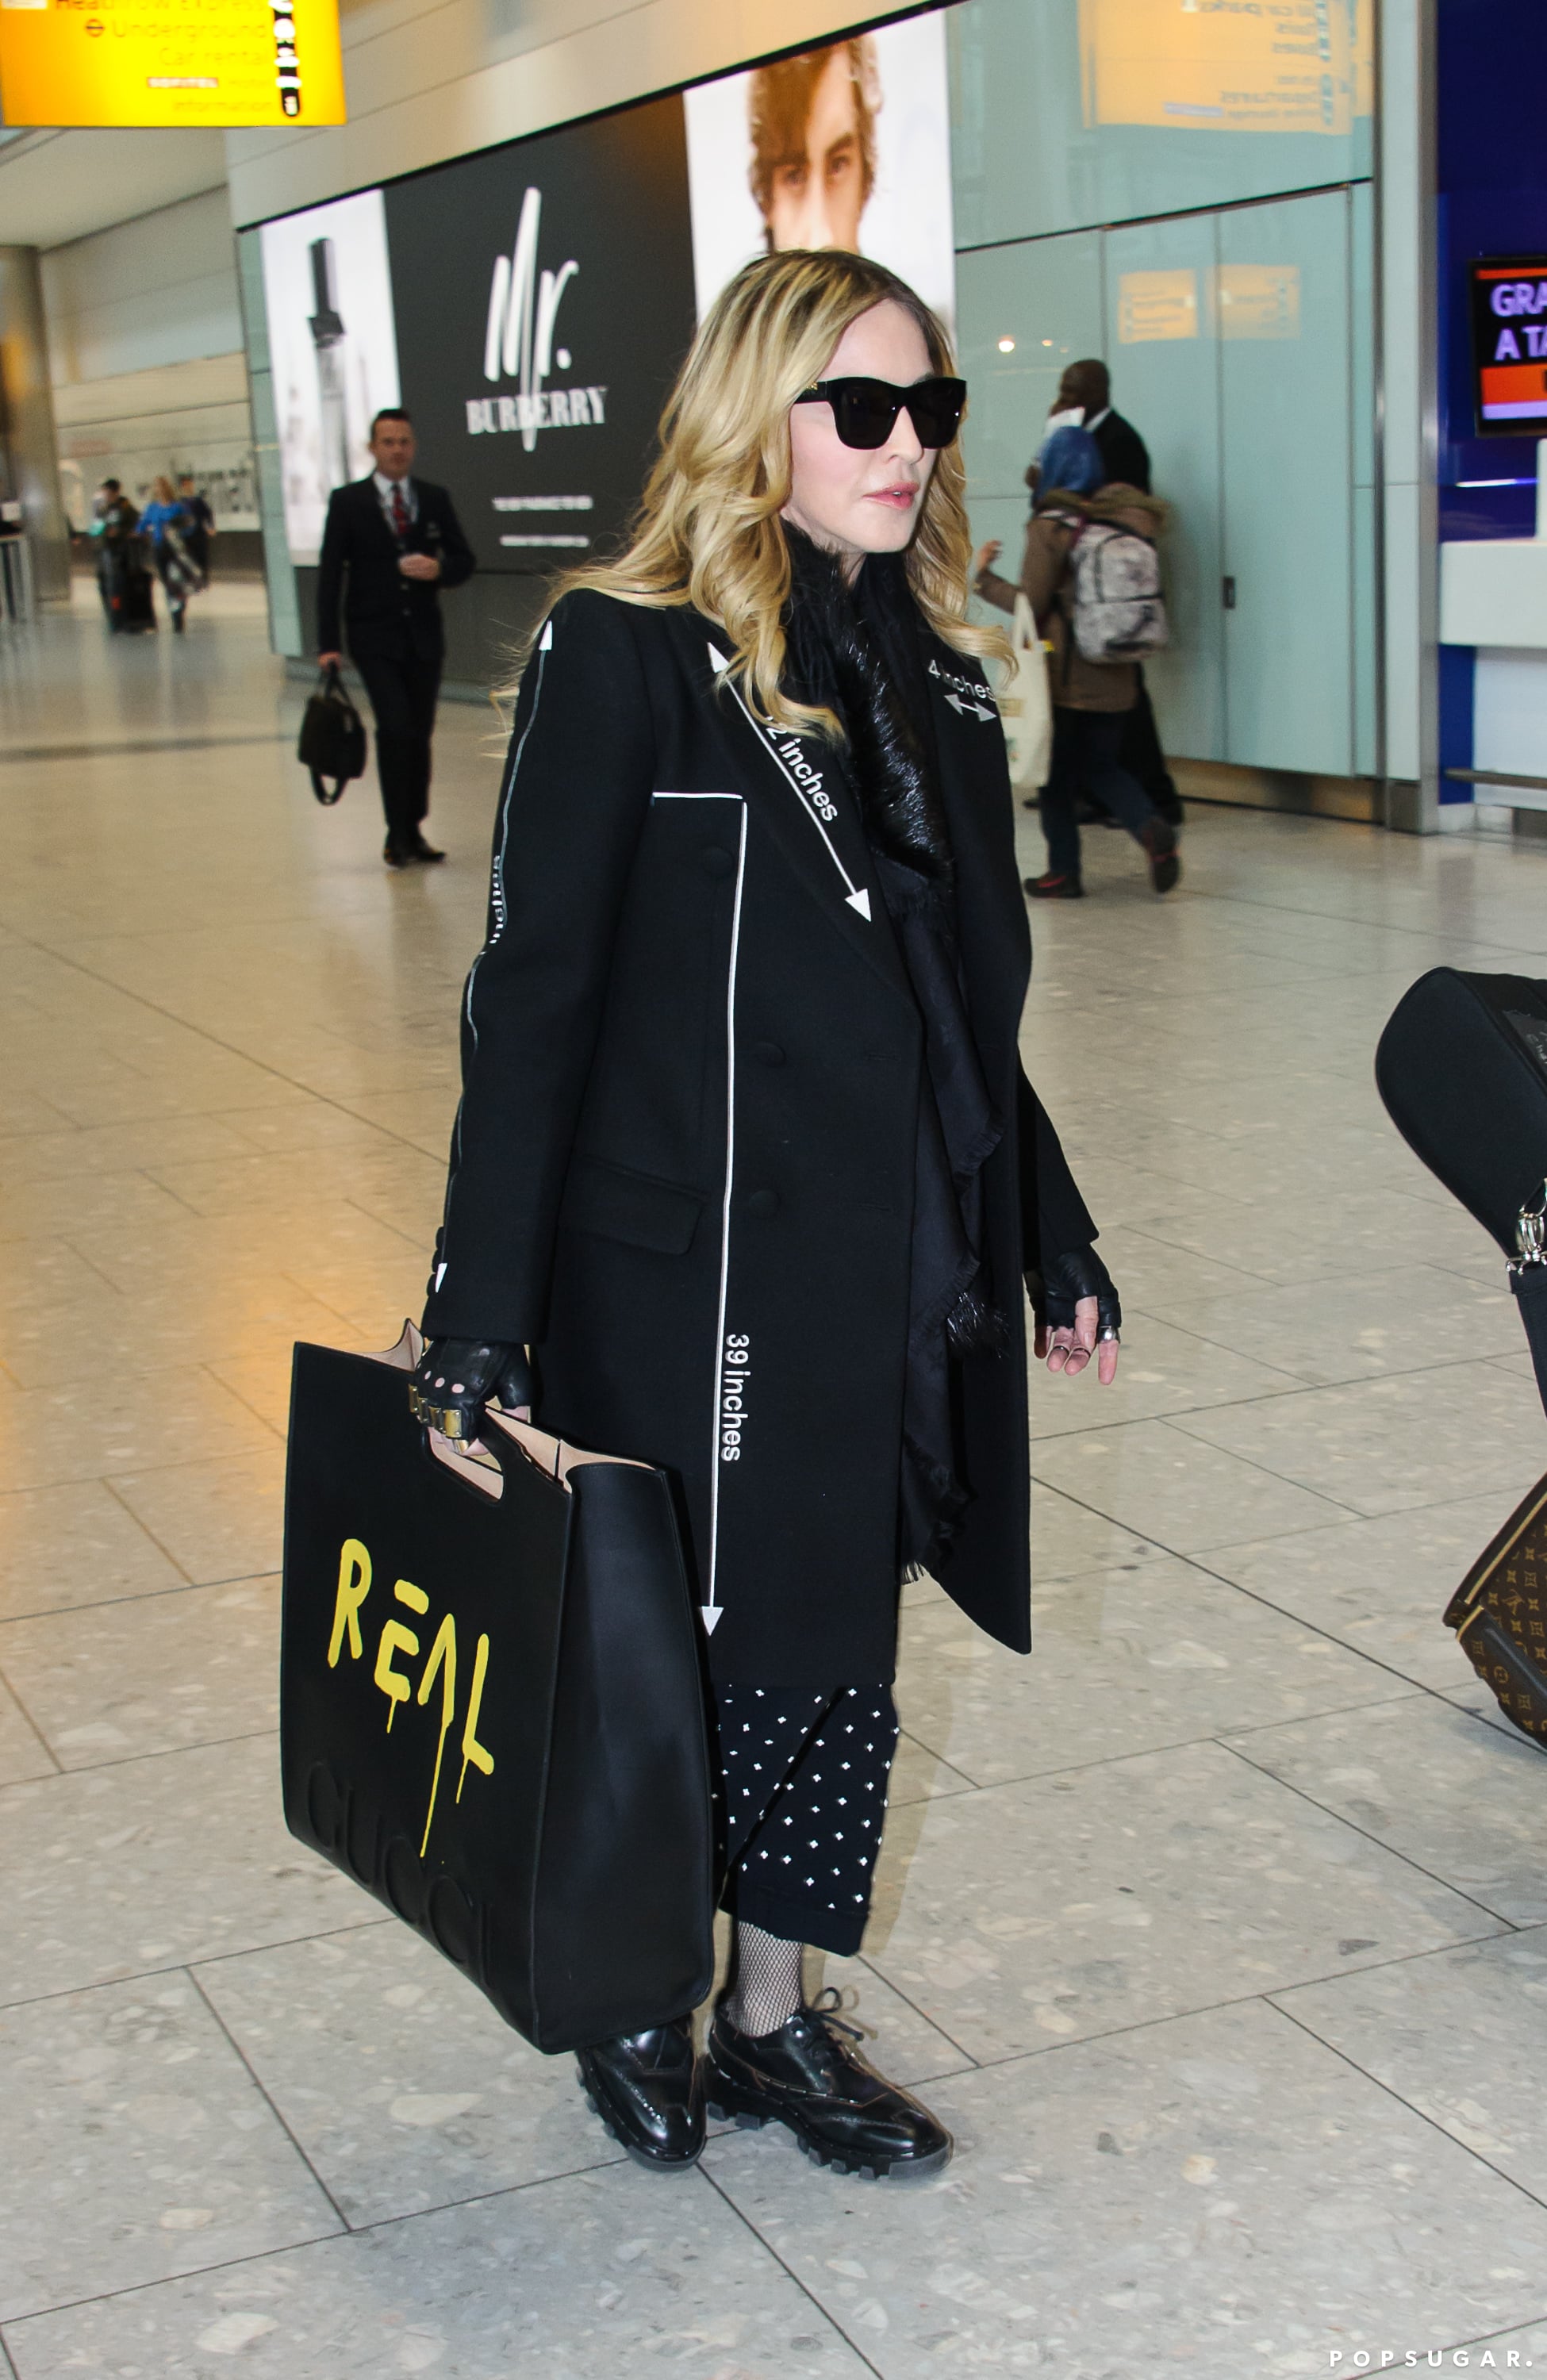 Madonna-Carrying-Her-Gucci-Bag-Through-A